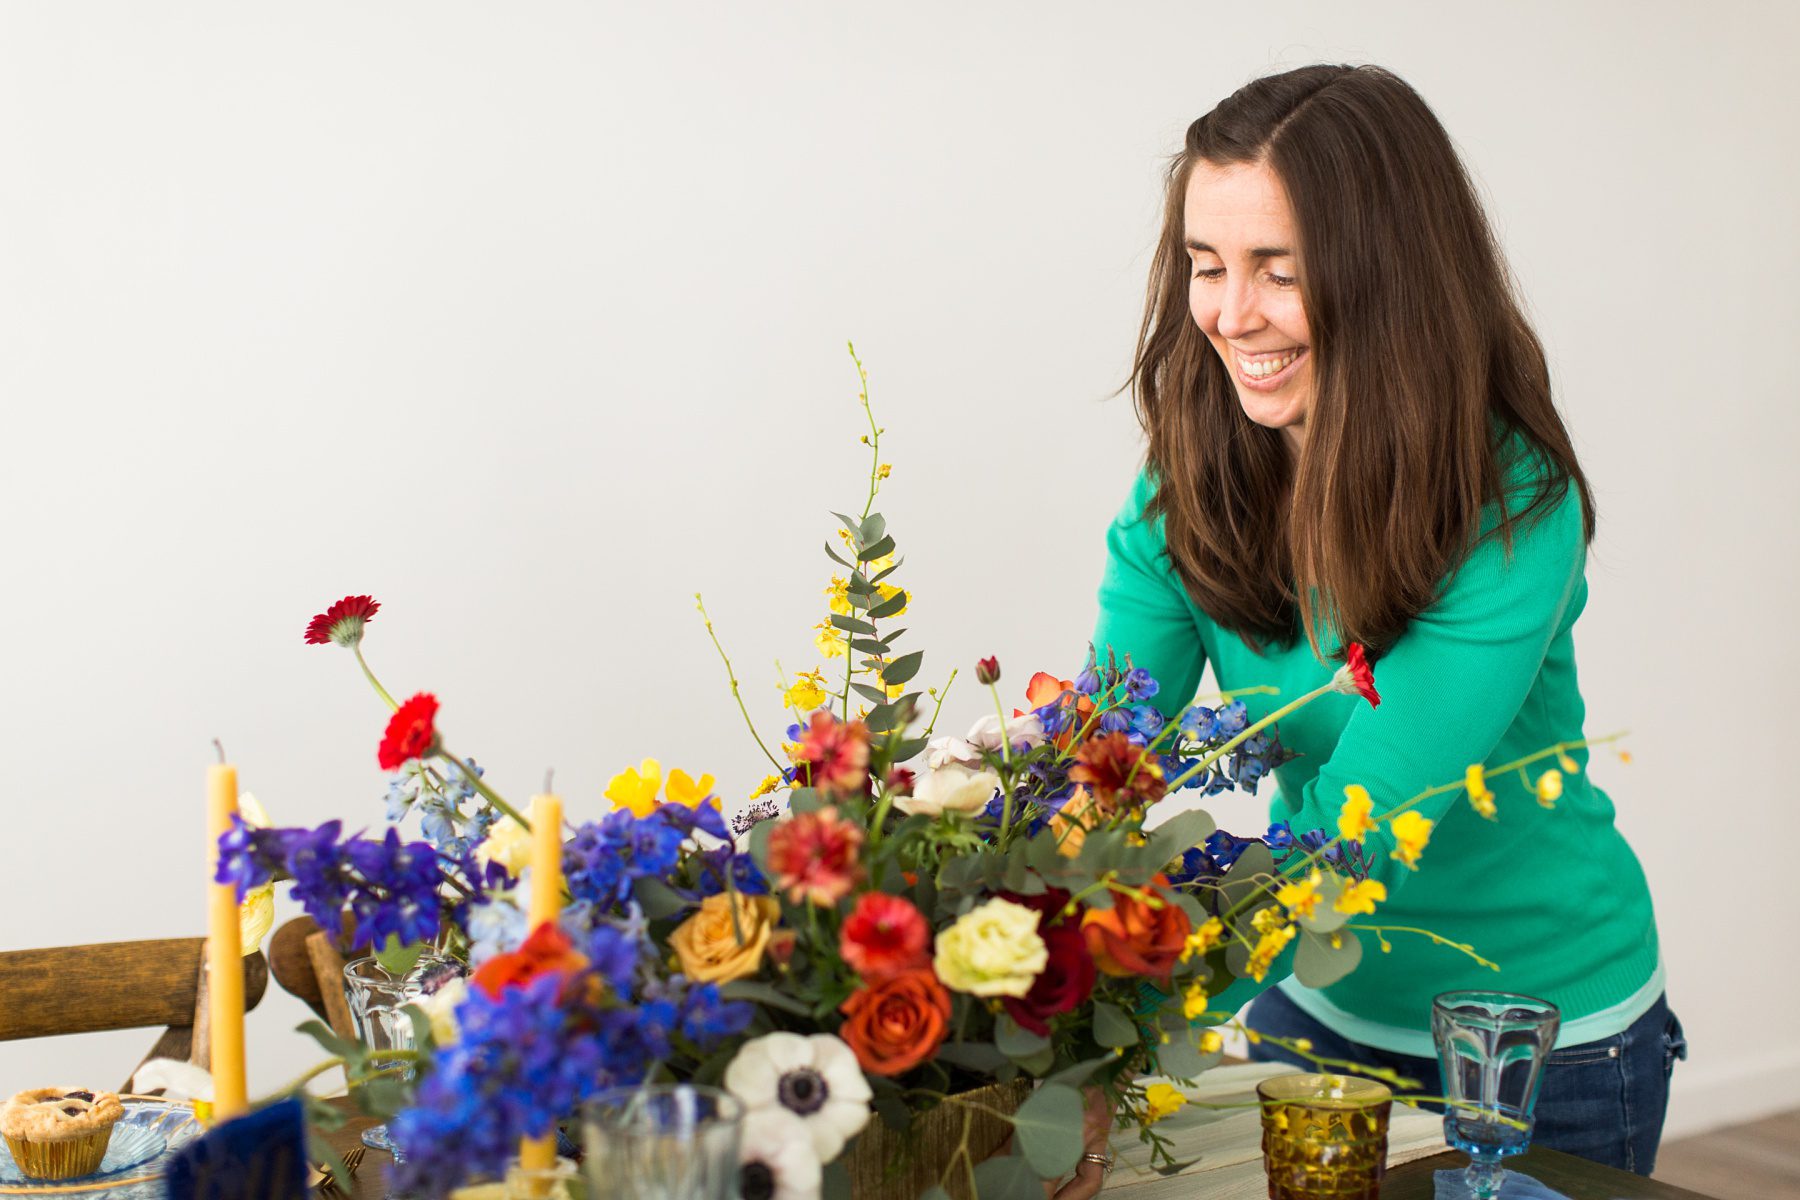 a lady in a geen top puts a floral arrangement on a table